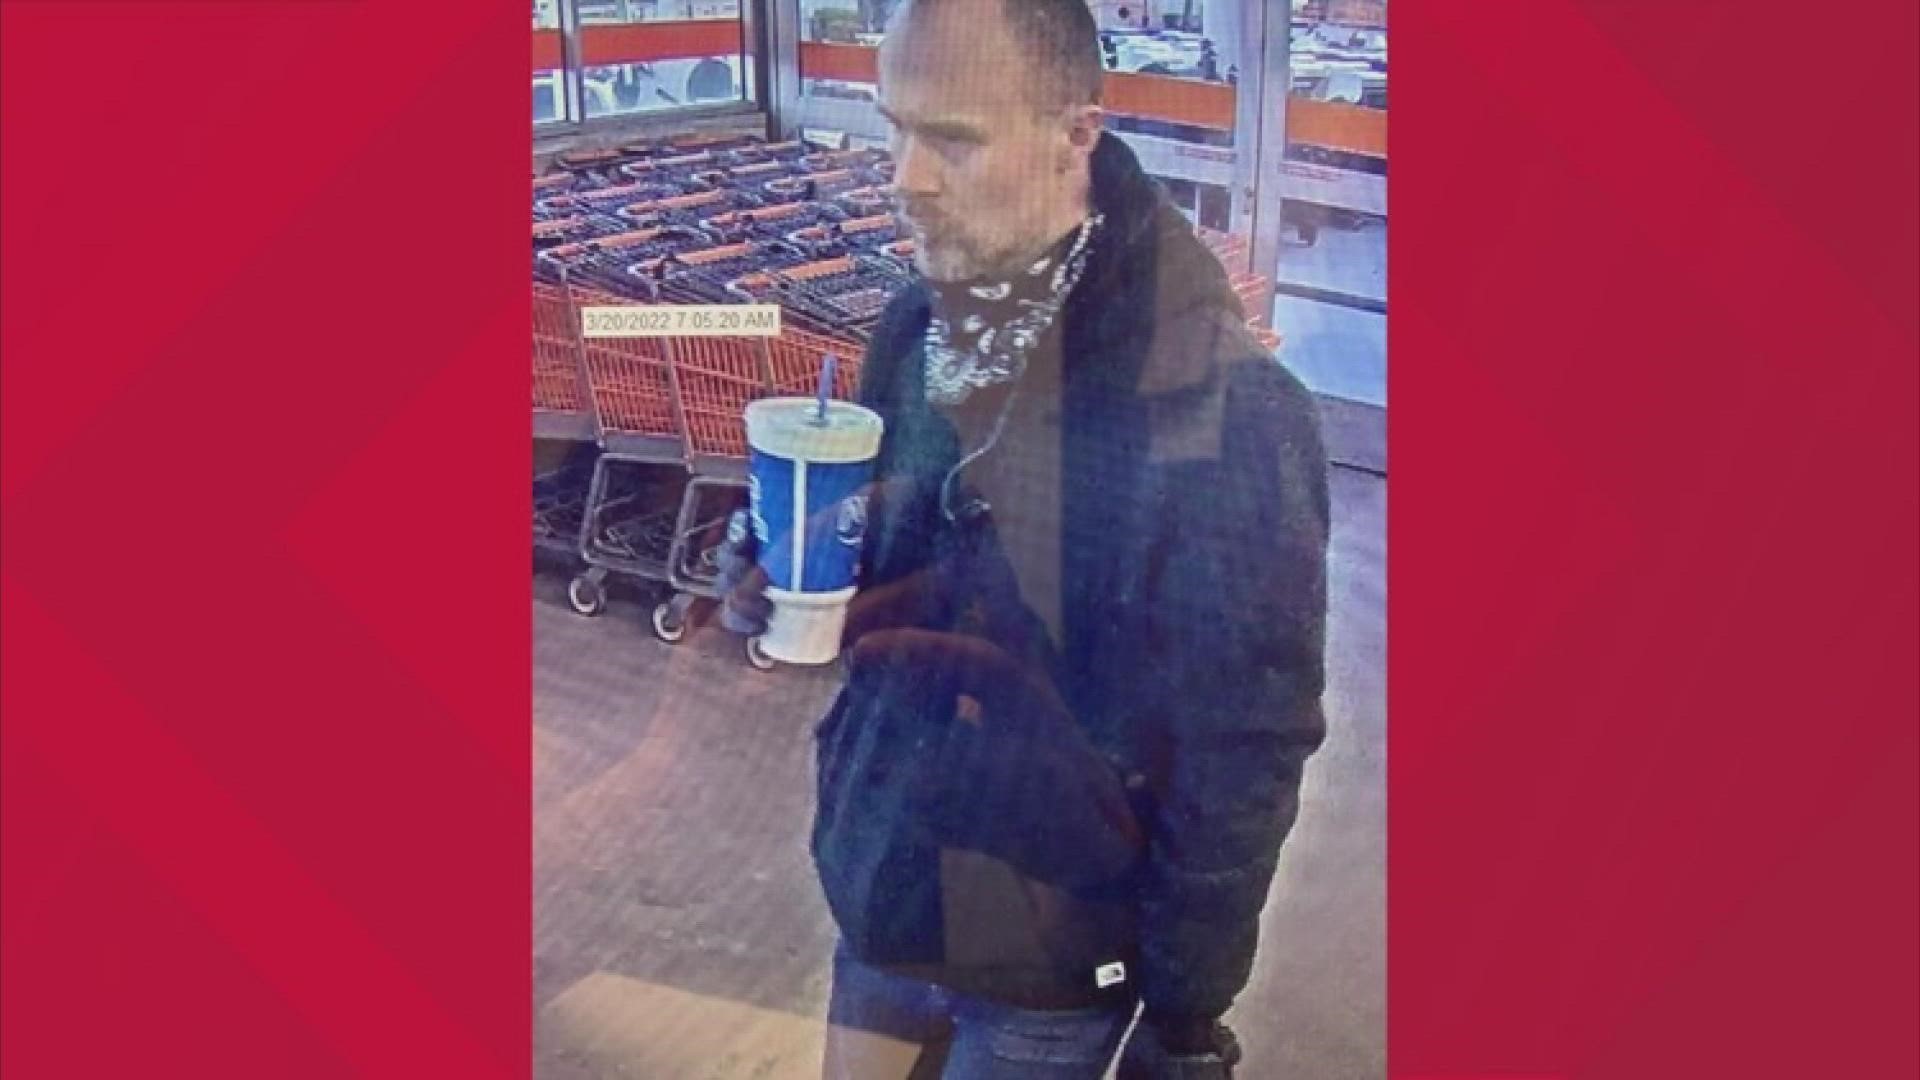 The Coeur d'Alene Police Department (CDAPD) is asking for the public's assistance in locating the suspect of a robbery that occurred at a business on March 20.